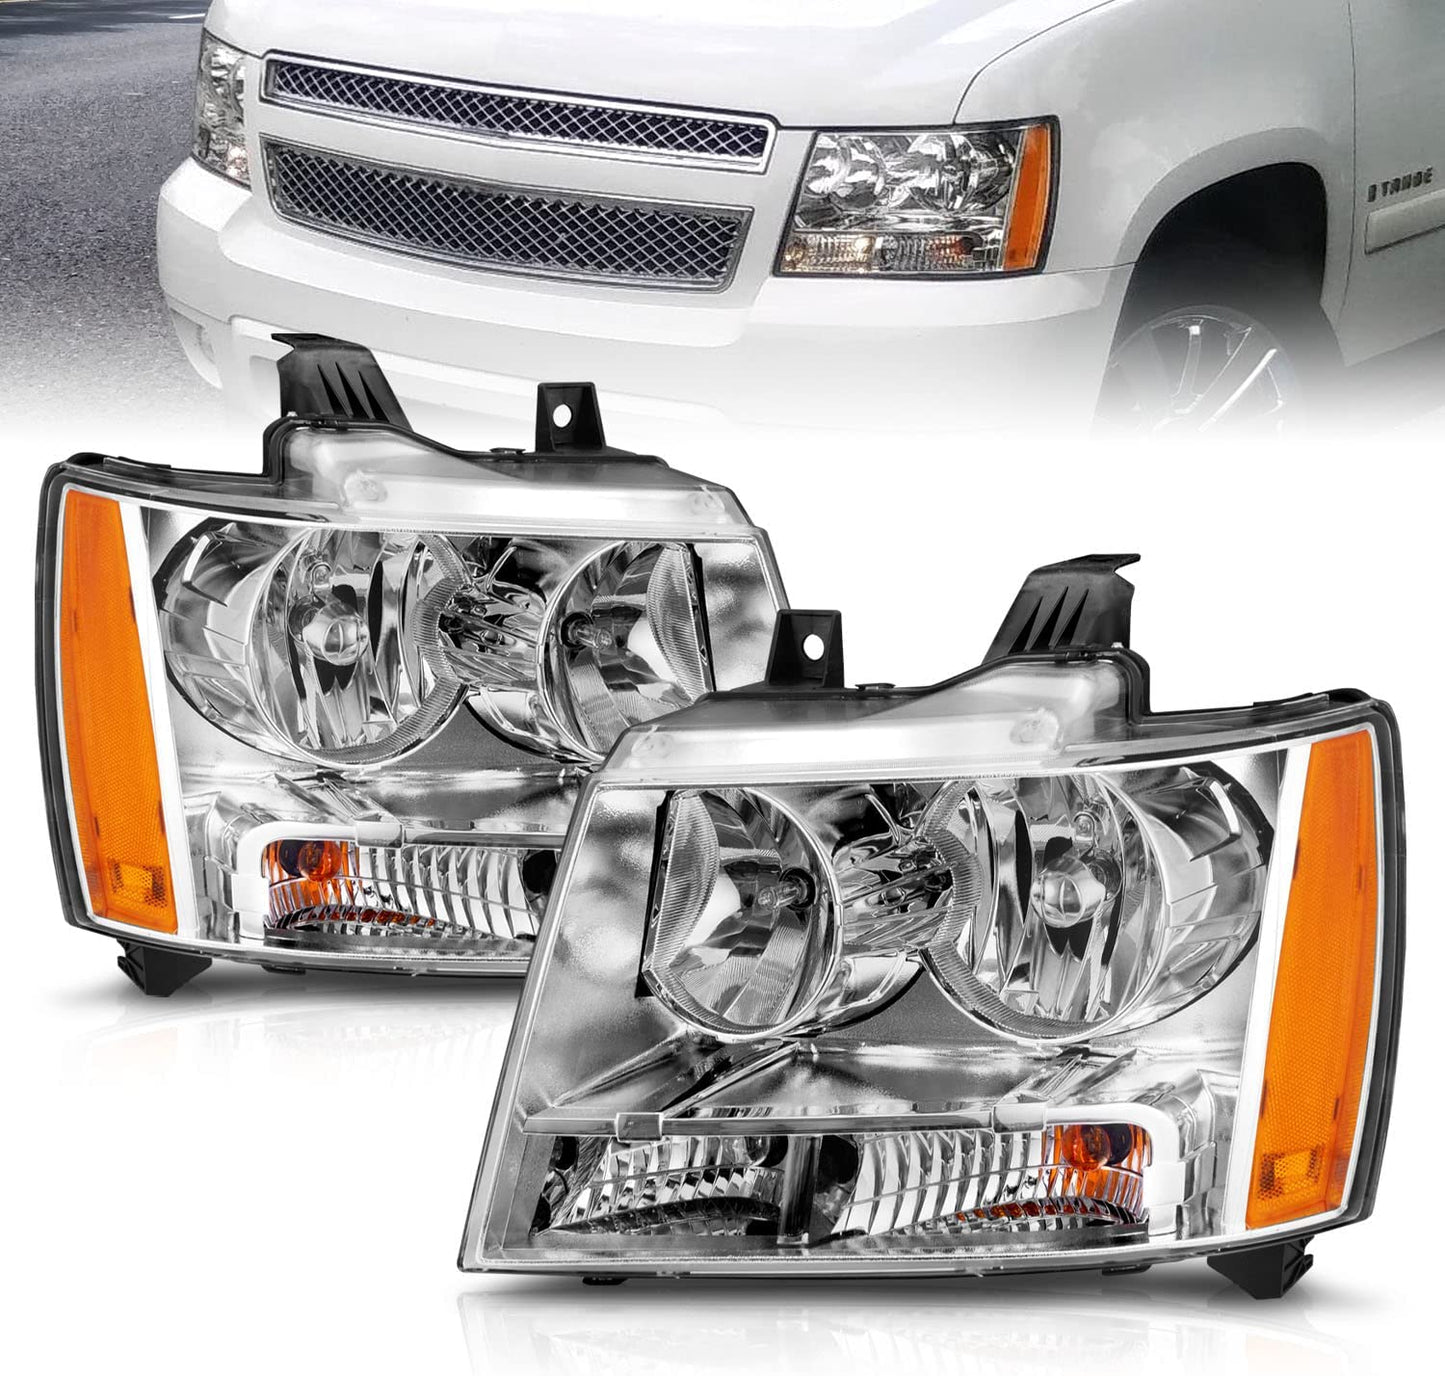 AmeriLite for Chevy 07-13 Tahoe/Suburban/Avalanche Factory Style Replacement Headlights Pair - Driver and Passenger Side Chrome Housing